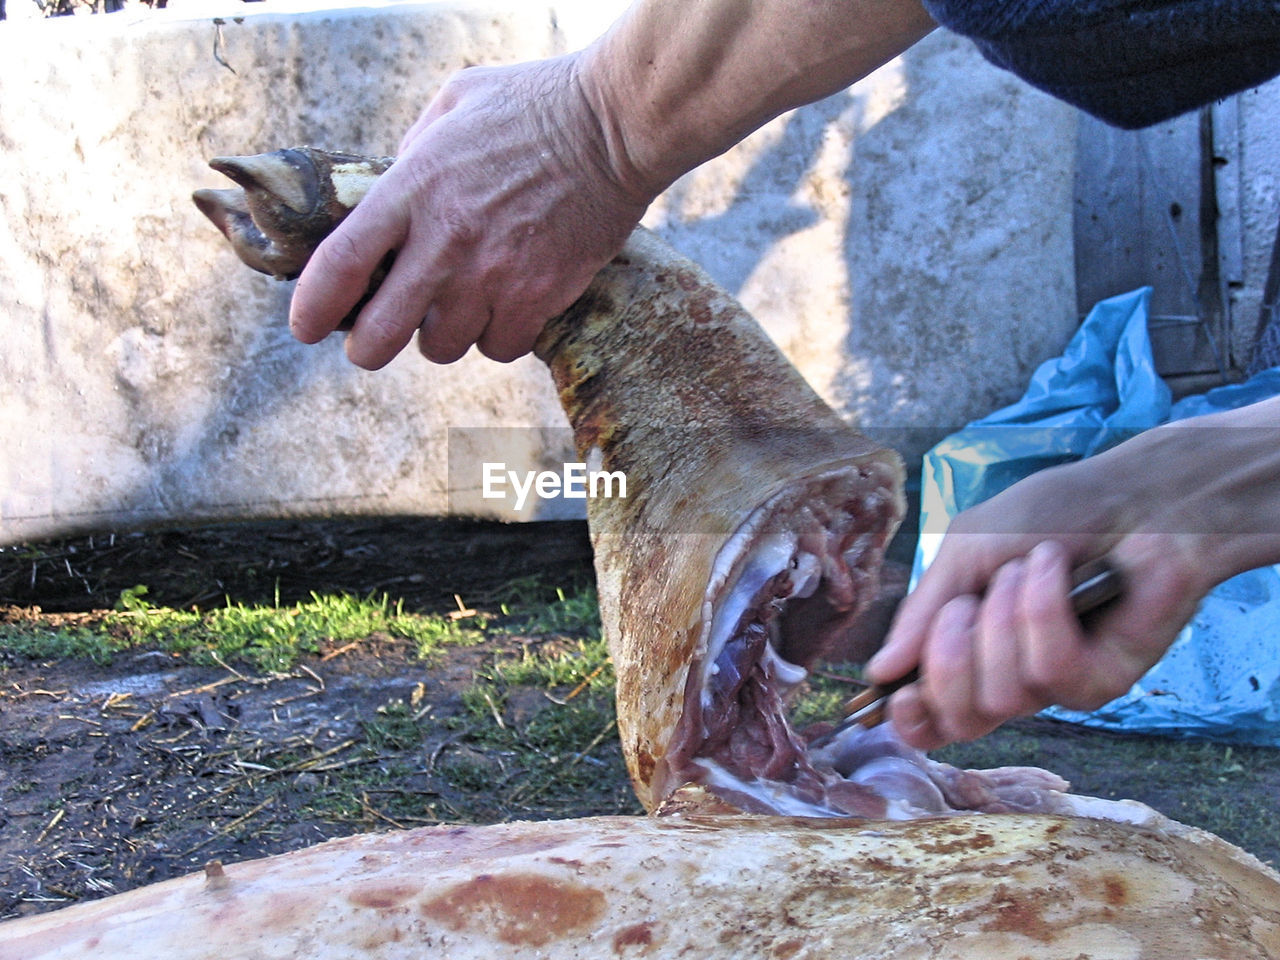 Close-up of person cutting meat